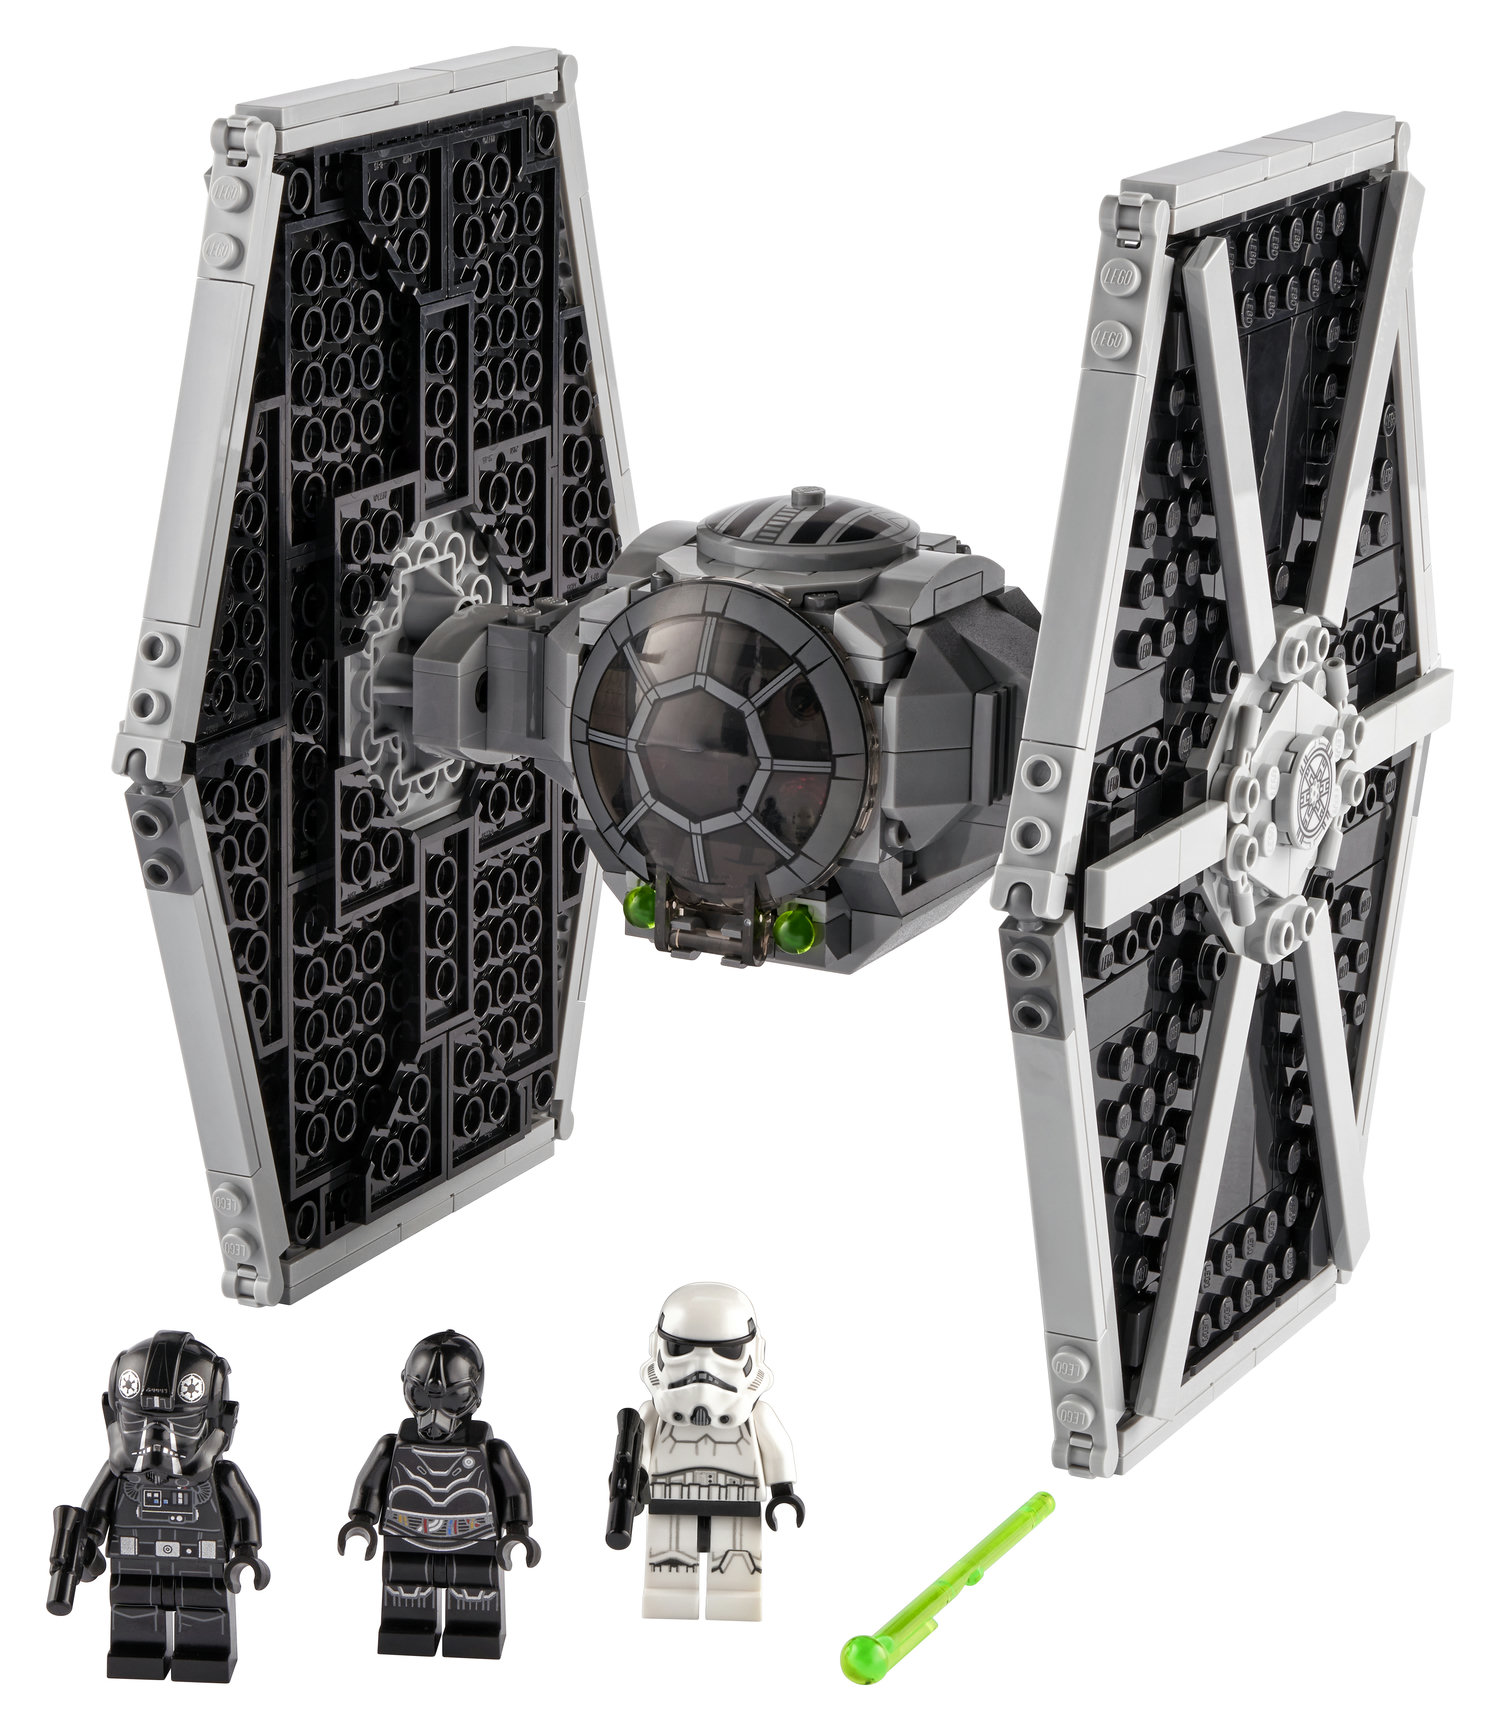 432-Piece LEGO Star Wars Imperial TIE Fighter Building Kit (75300) $32 + Free Shipping